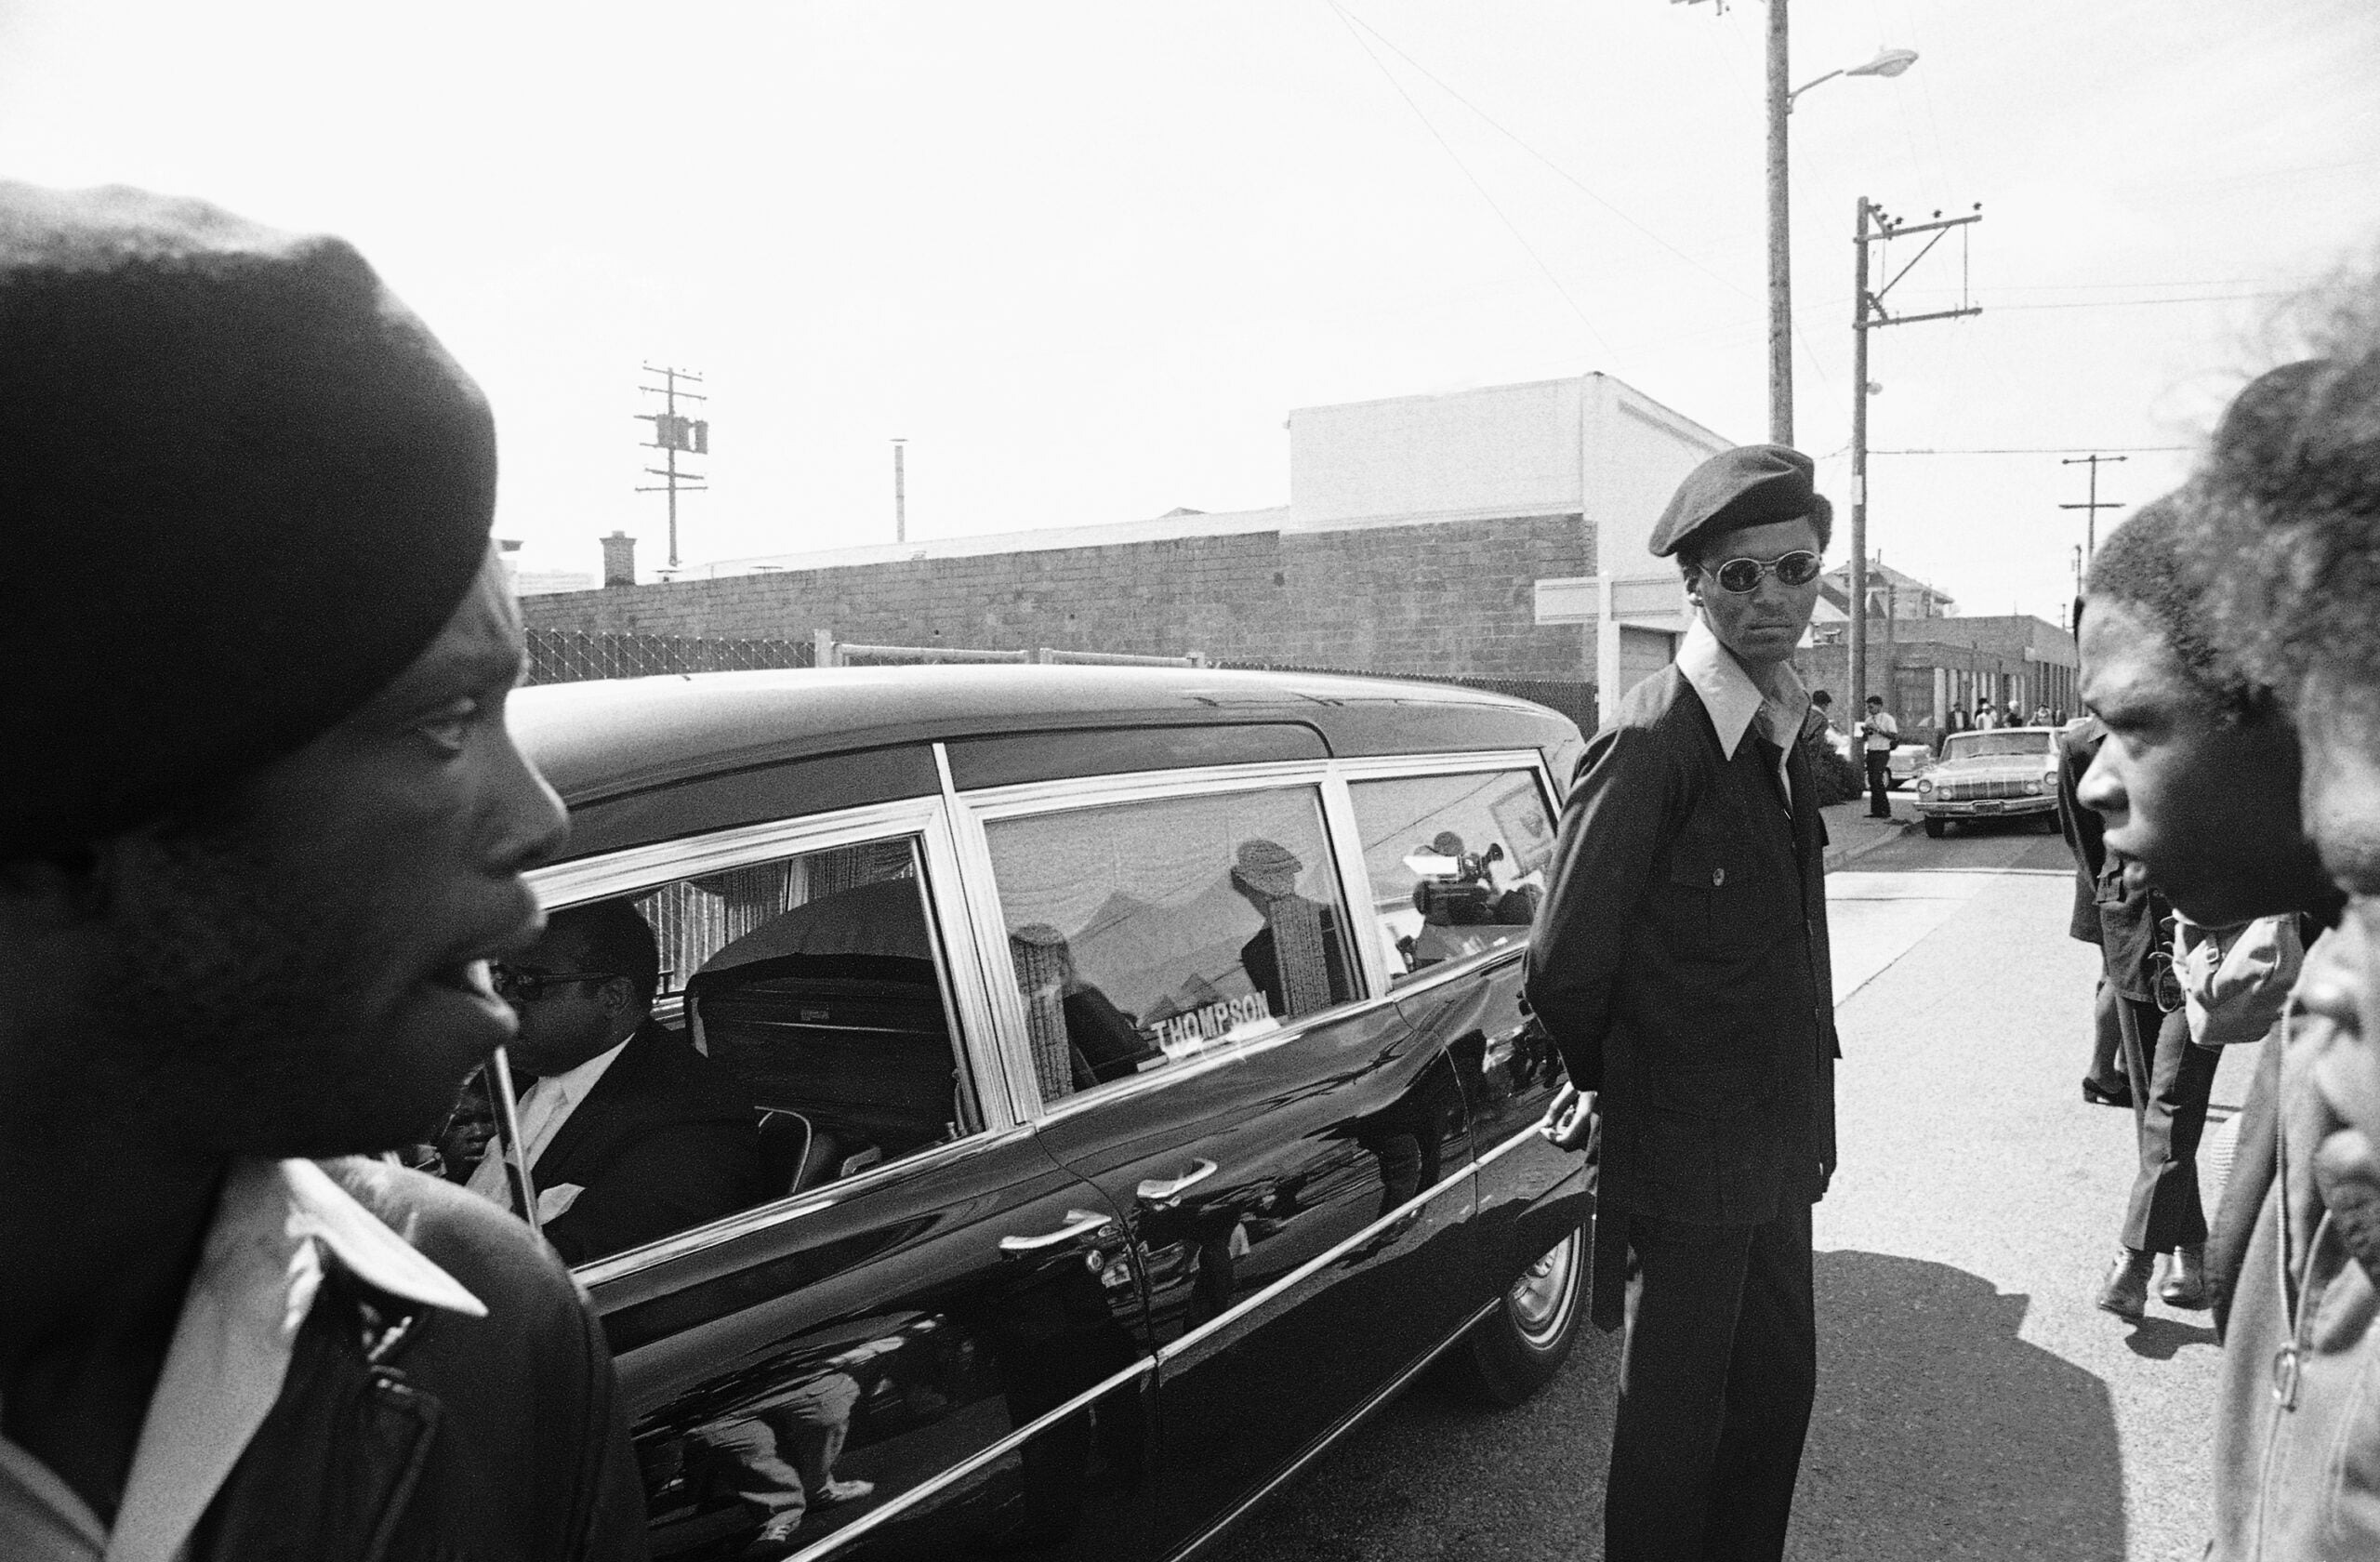 Black Panthers stand guard on Aug. 28, 1971, in Oakland, Calif., while the hearse carrying the body of George Jackson was brought to St. Augustine's Episcopal Church.